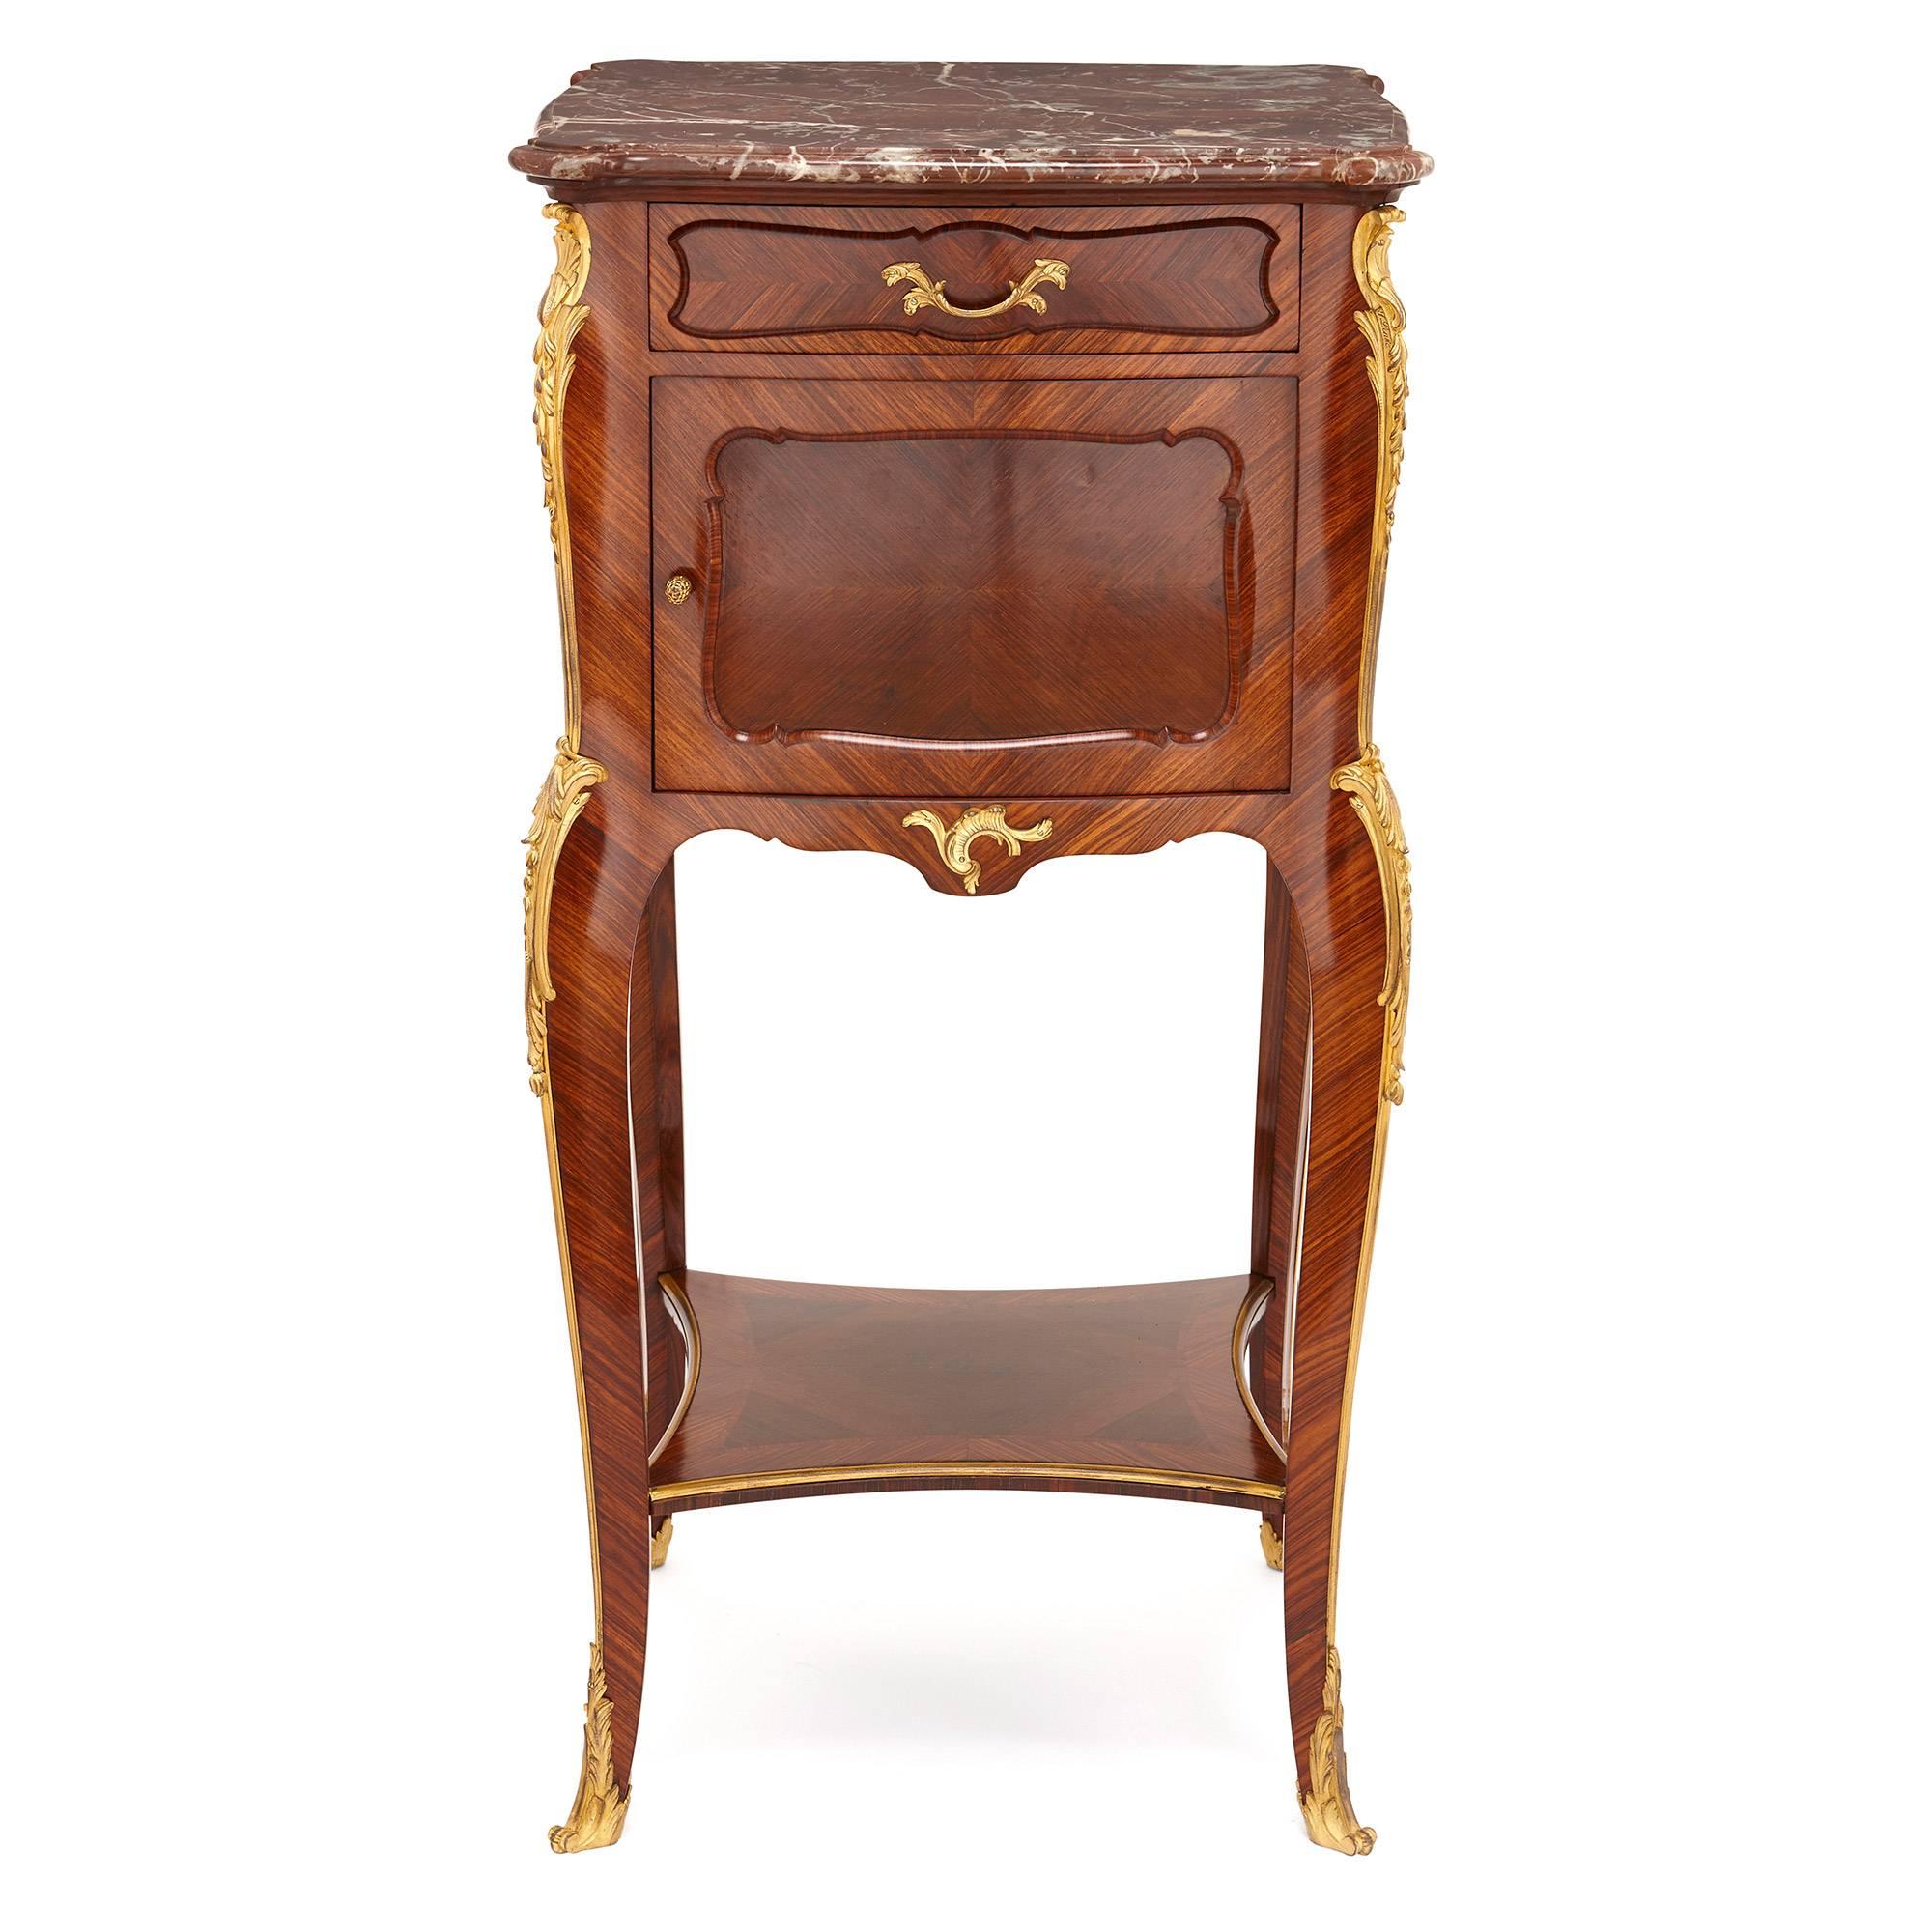 Possibly the greatest craftsman of the late 19th and early 20th century, French cabinetmaker Francois Linke, is responsible for the design of this stunning side cabinet. 

Inspired by the 18th century Rococo style, the cabinet is beautifully